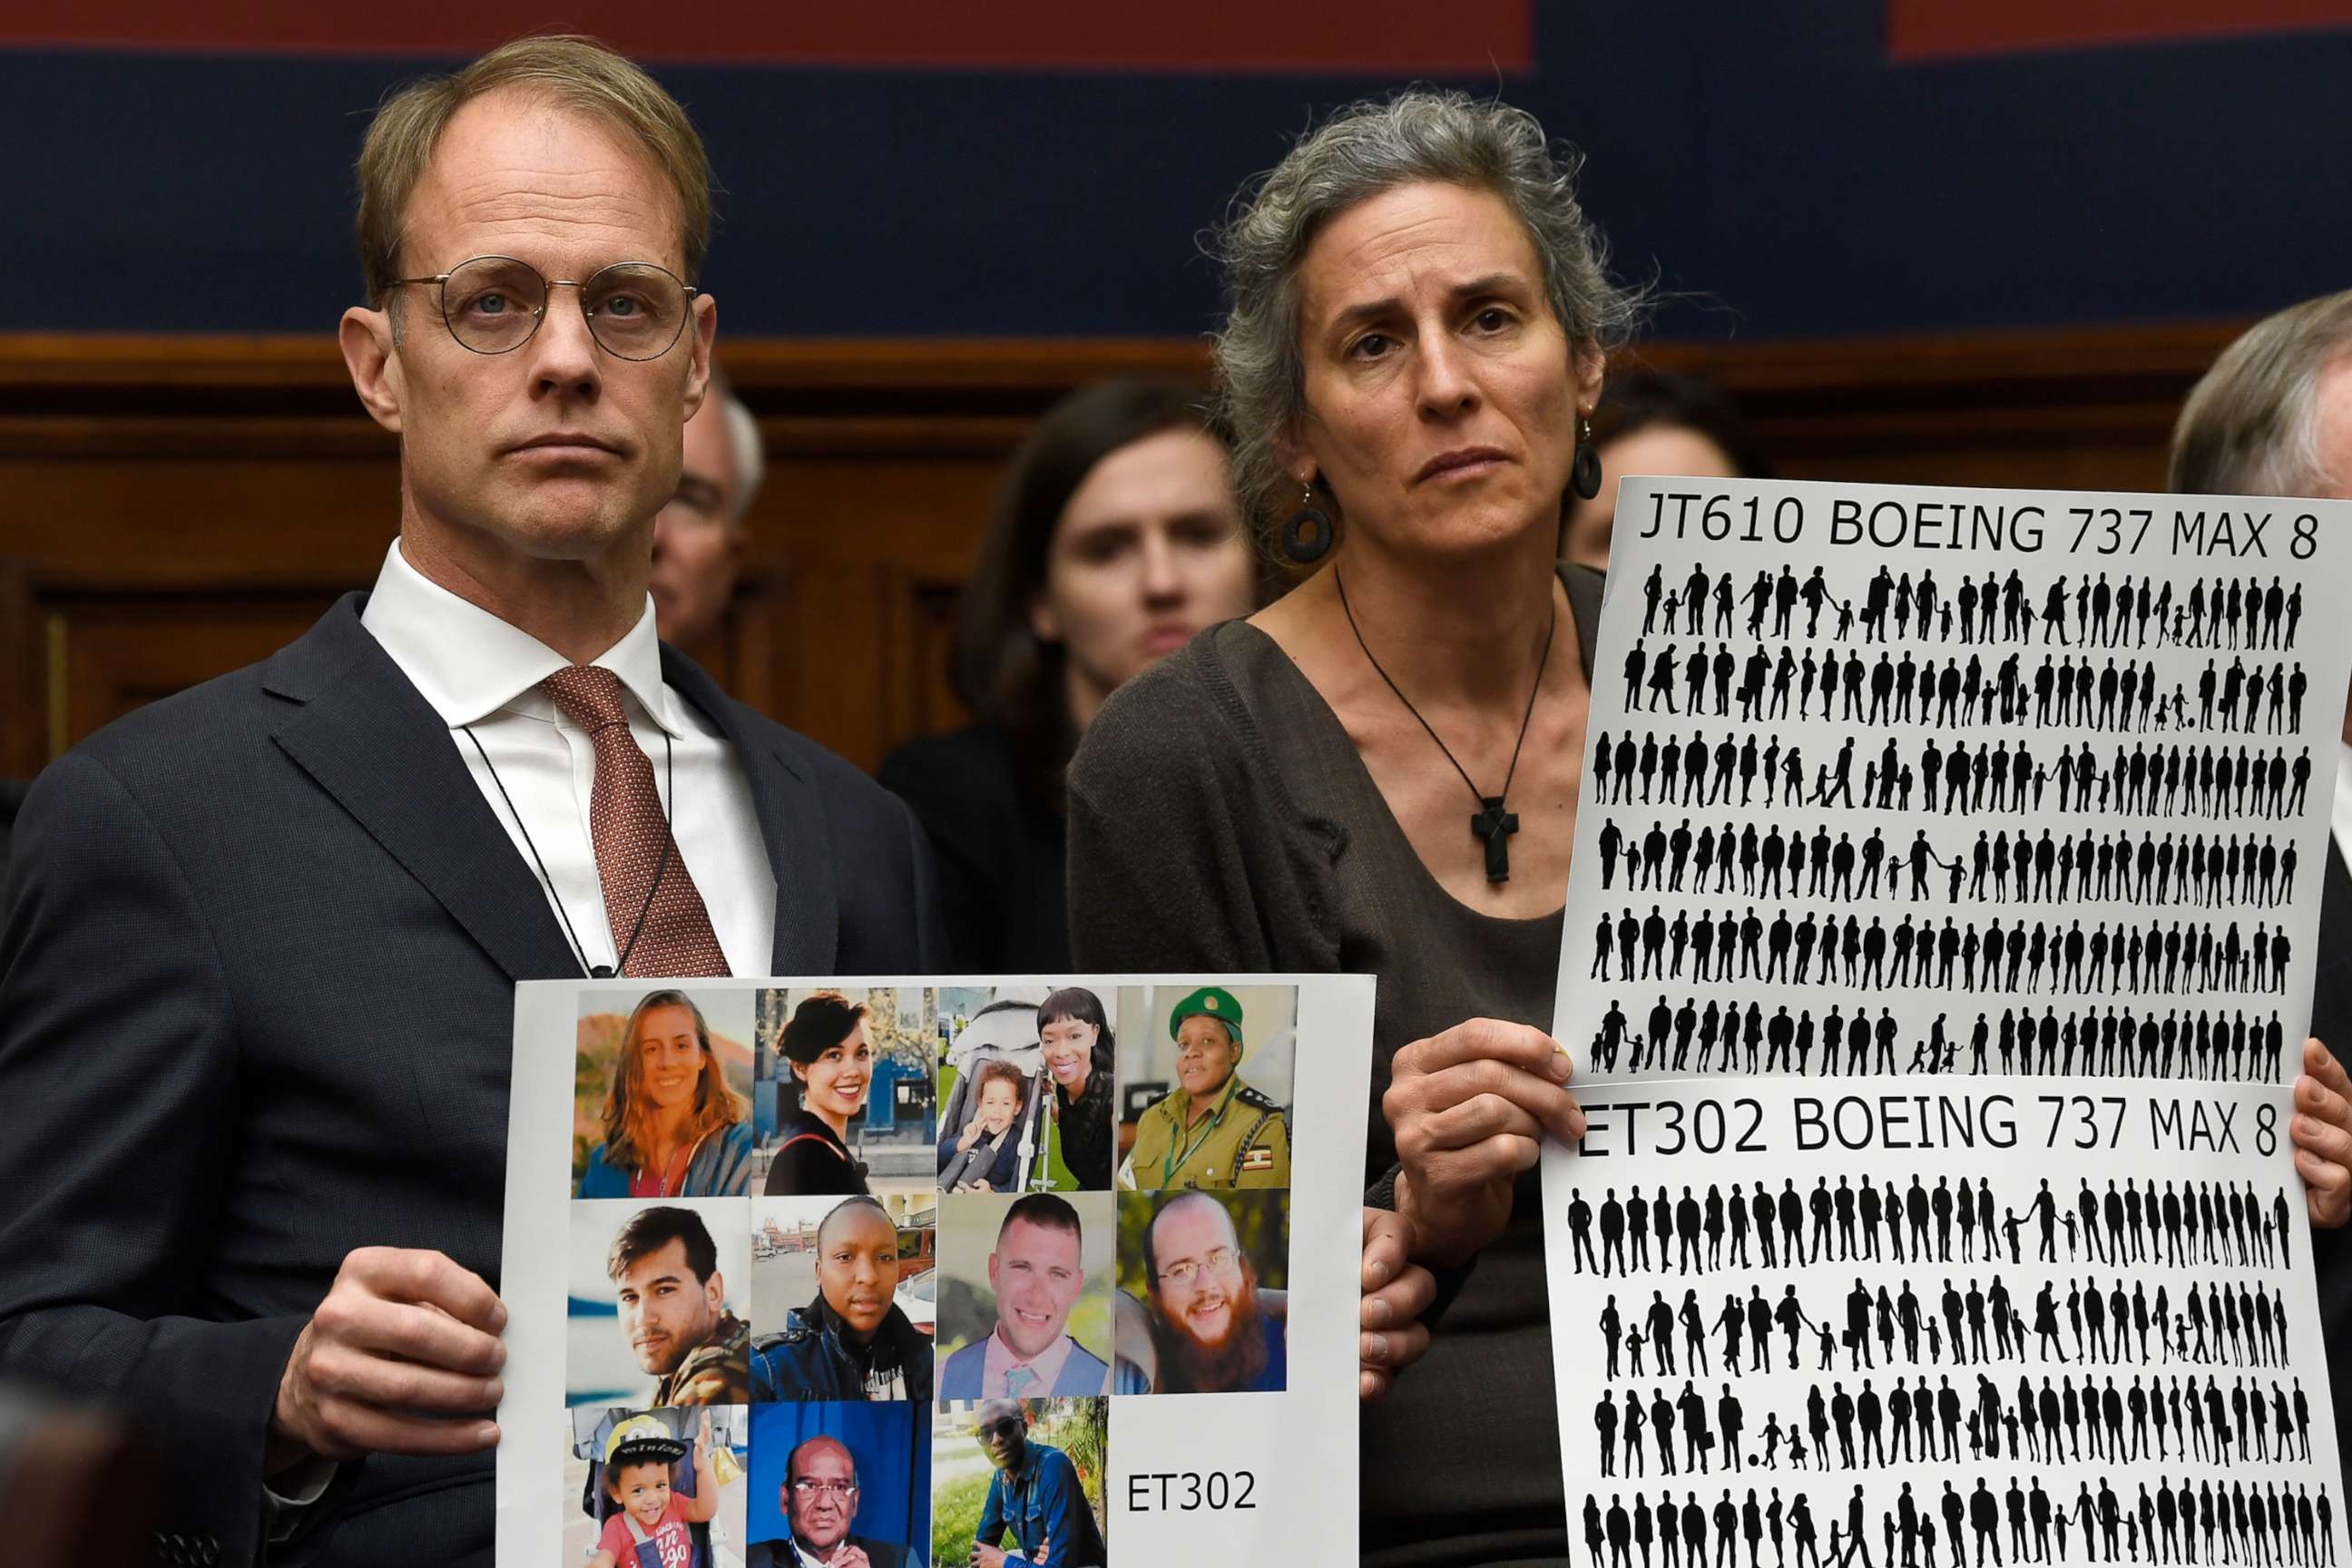 PHOTO: Michael Stumo and Nadia Milleron, right, parents of Samya Stumo, who died in the Ethiopian plane crash, listen during a House Transportation Committee hearing on Capitol Hill in Washington, D.C., May 15, 2019.